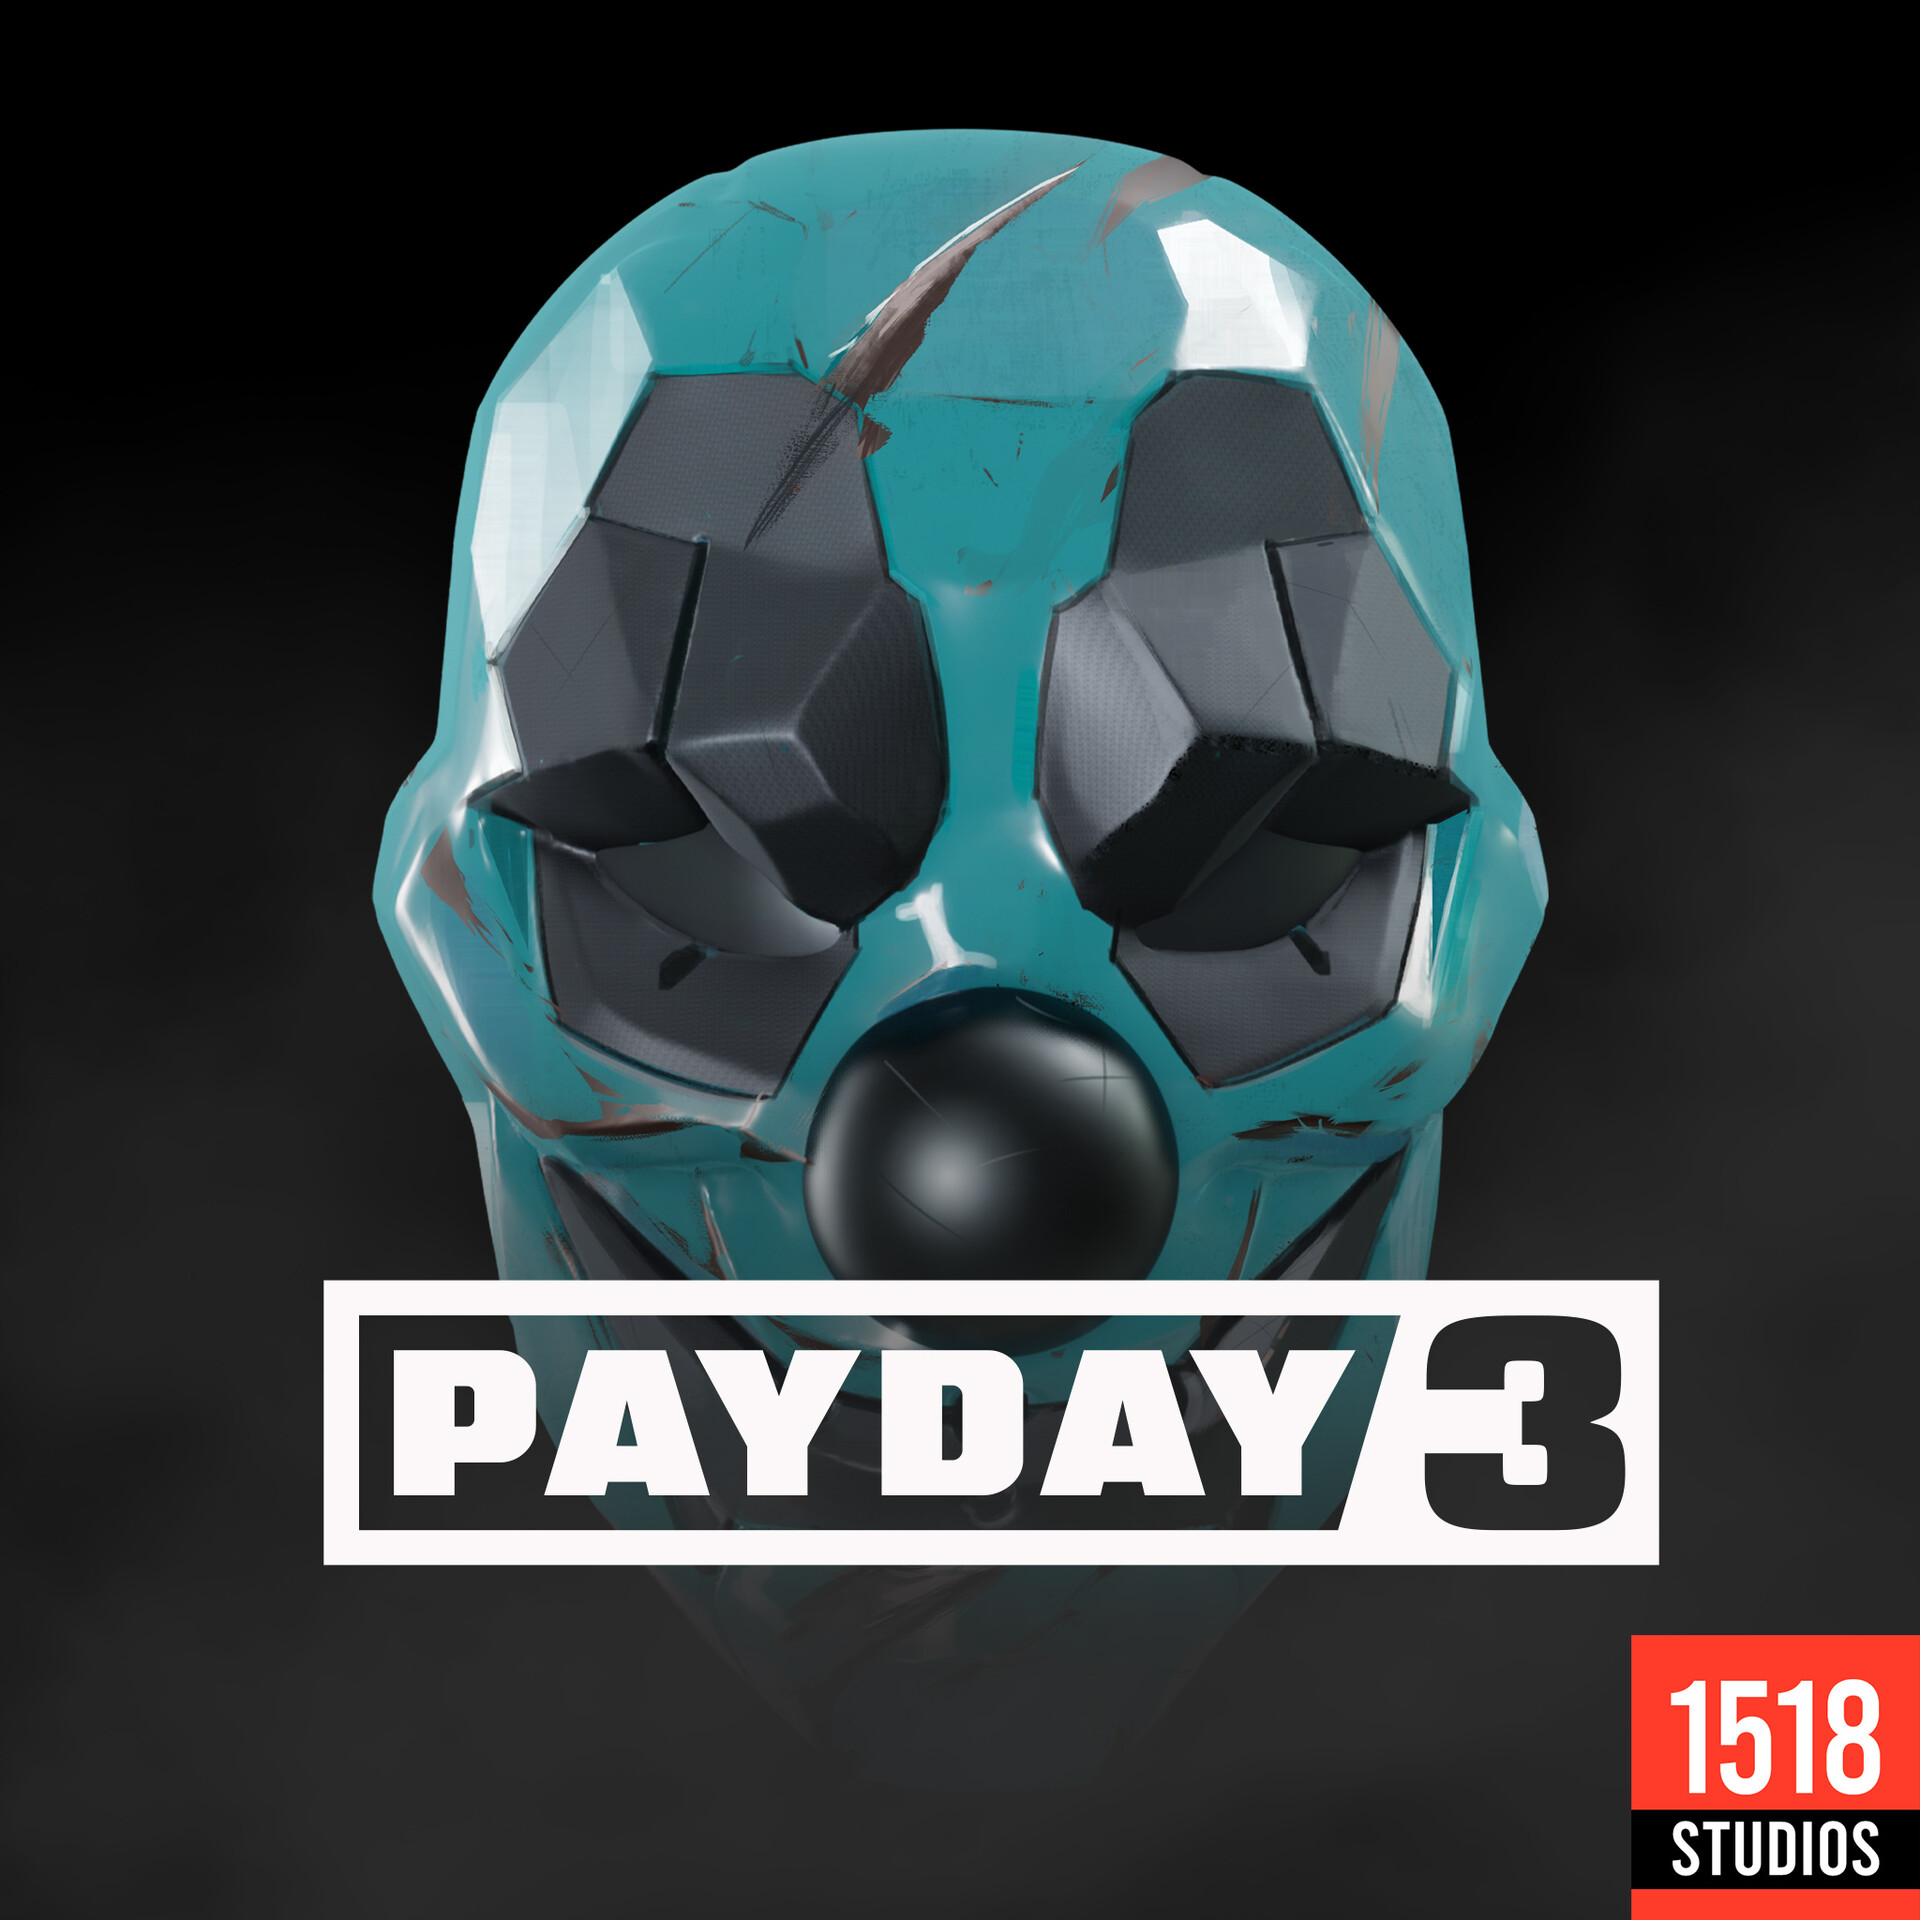 Payday 3 Reveals Crossplay, DLC Plans, And Monetisation < NAG